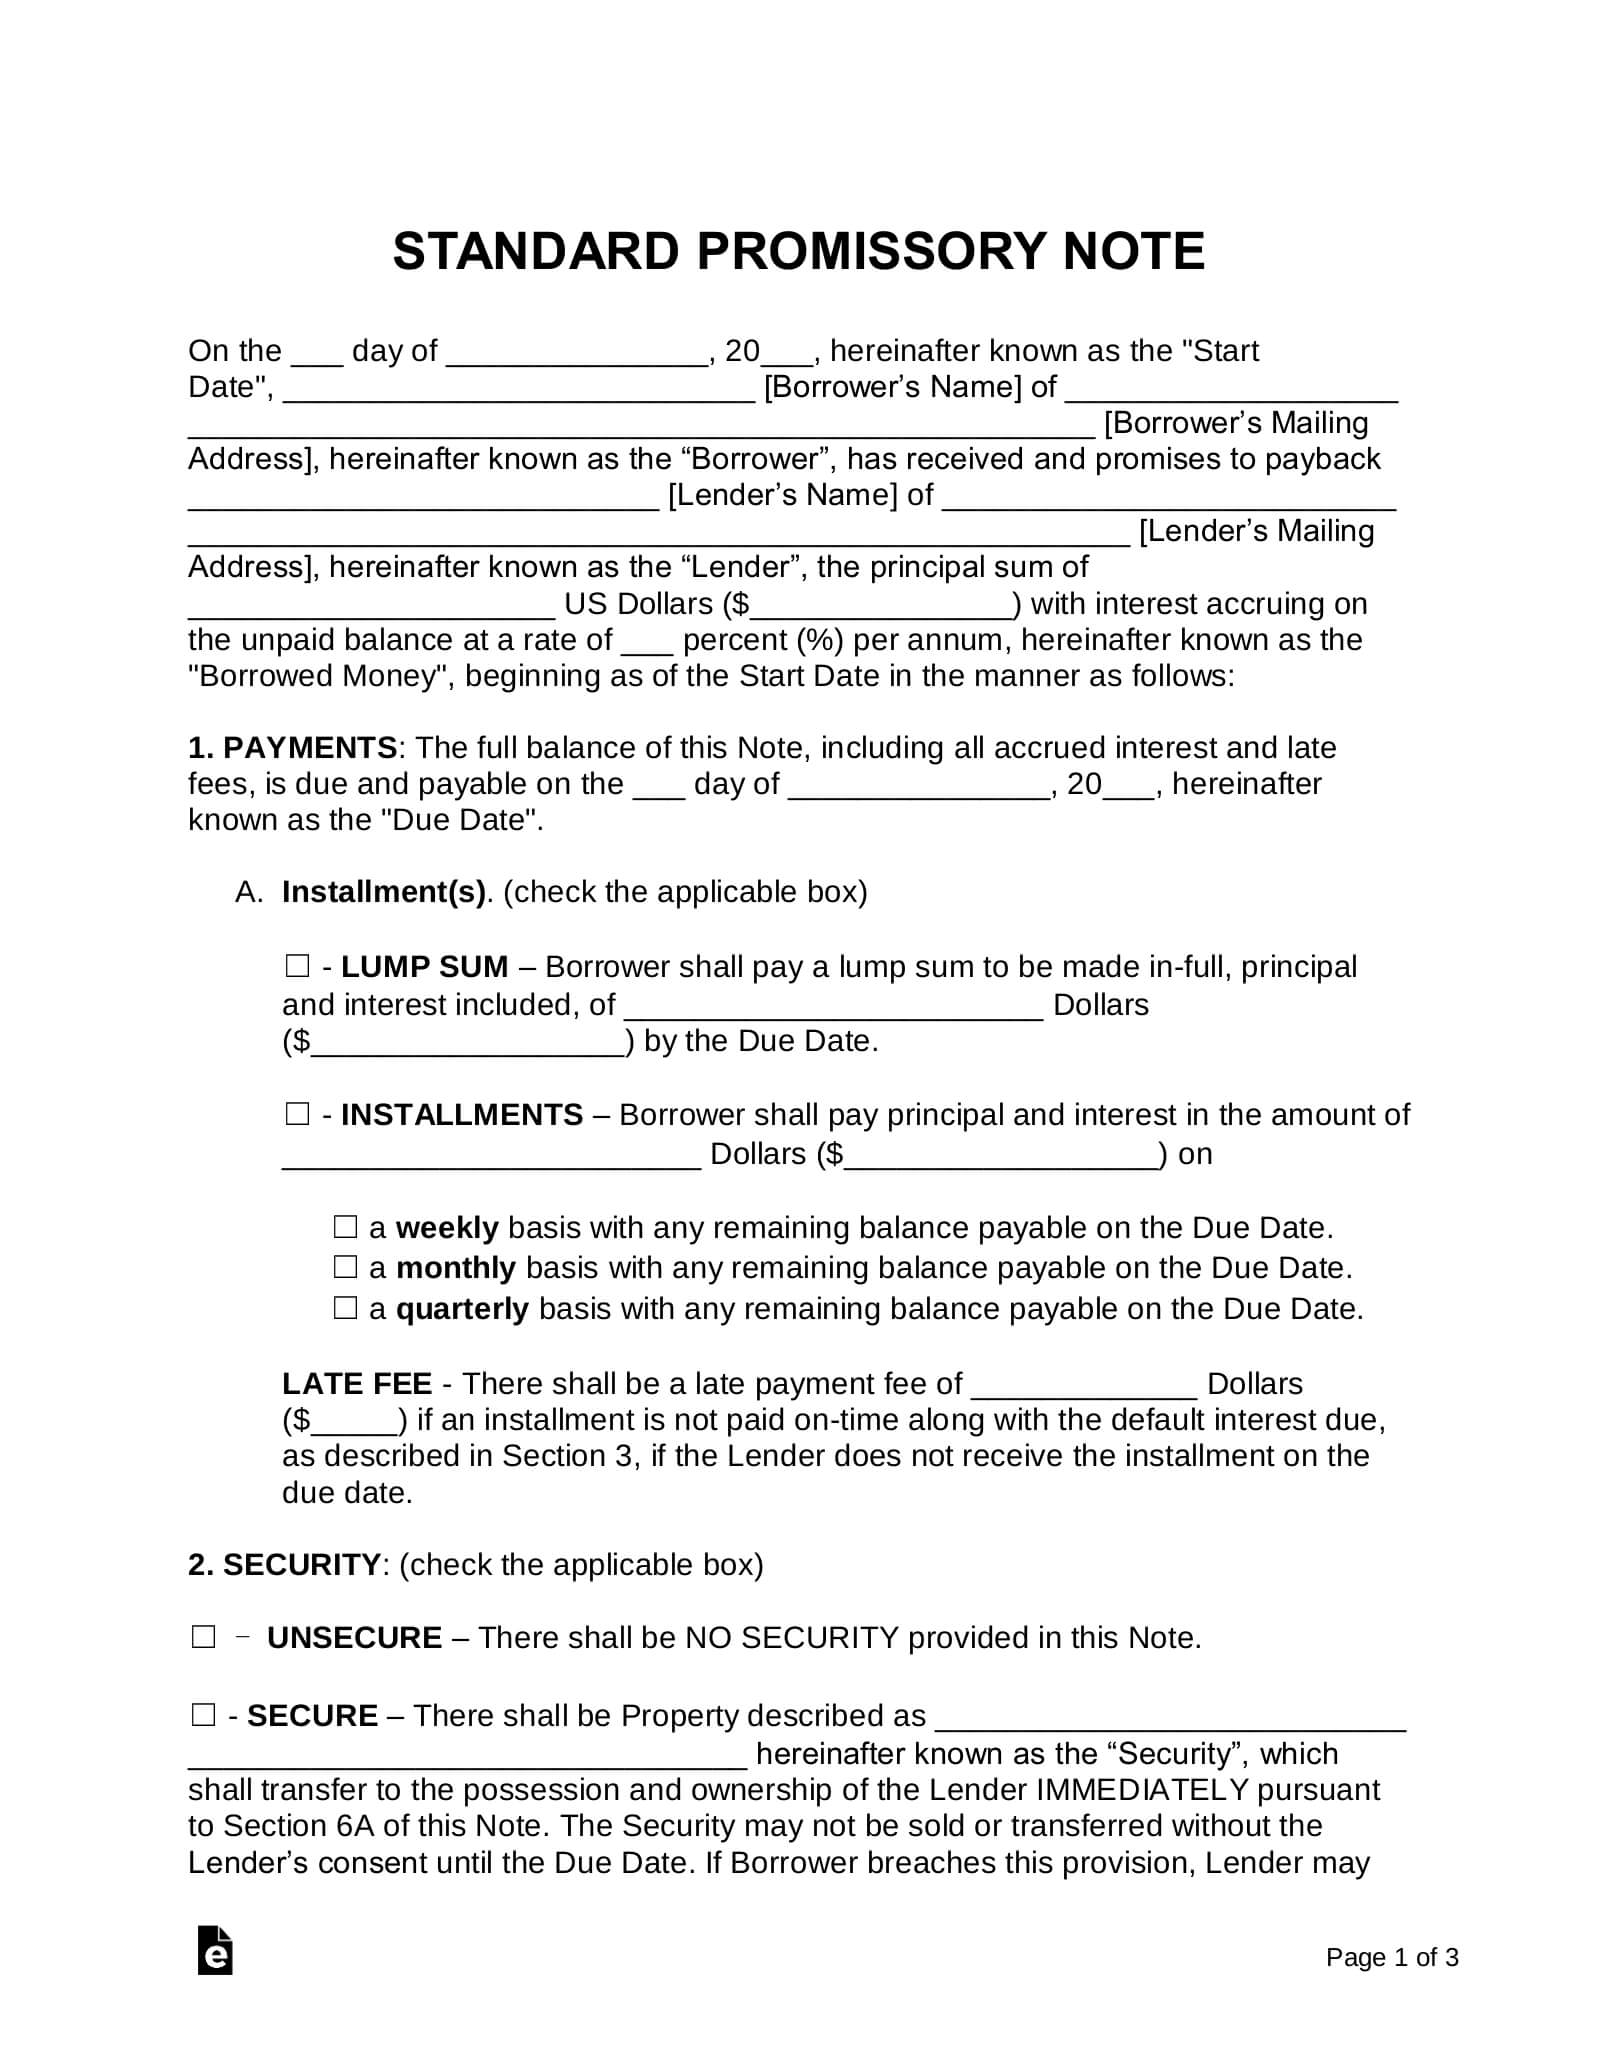 Free Promissory Note Templates - Word | Pdf | Eforms – Free In Auto Promissory Note Template